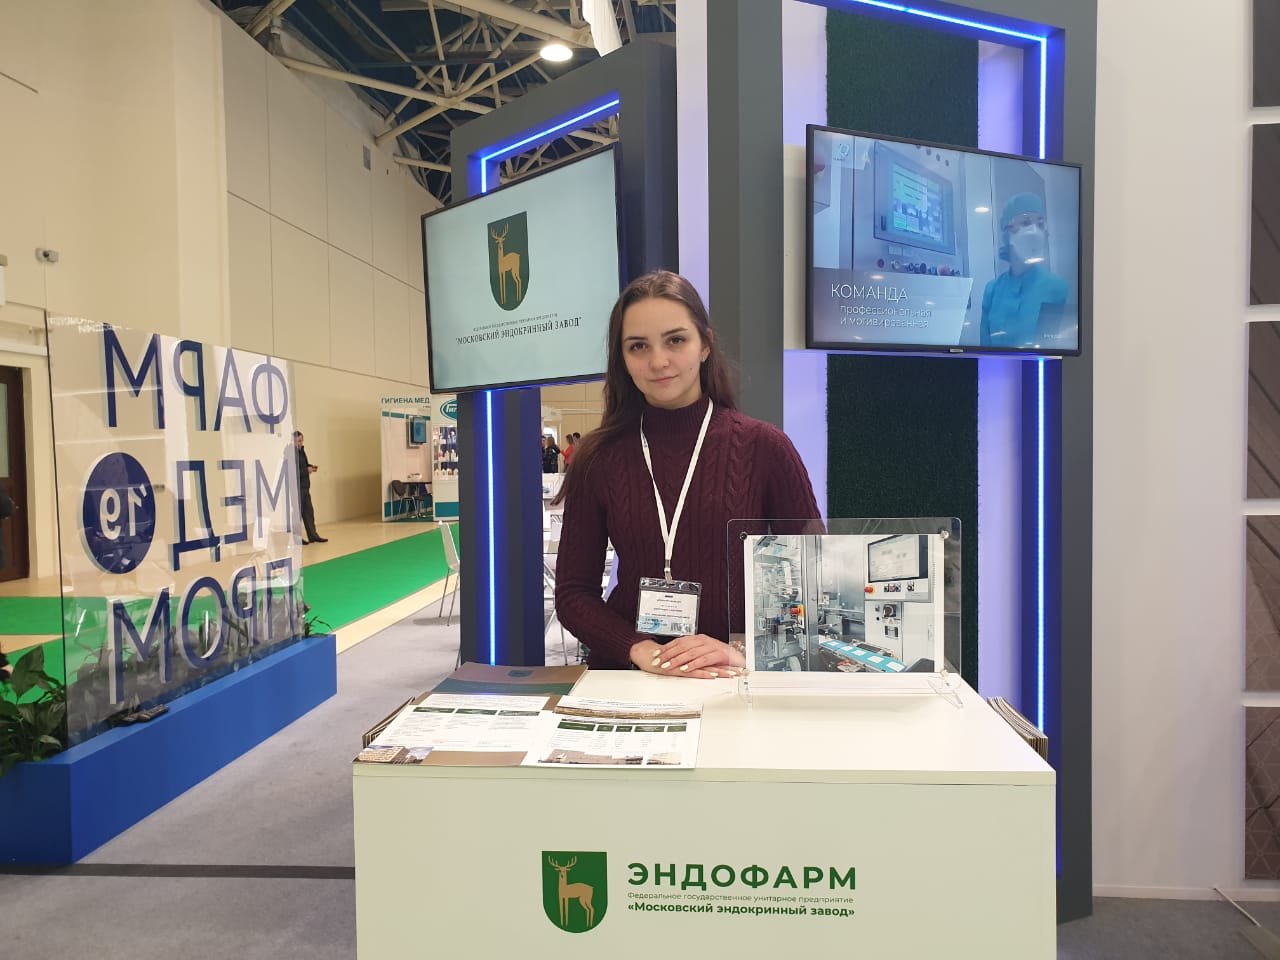 FSUE Moscow Endocrine Plant participated in “Pharmmedprom-2019” forum. 